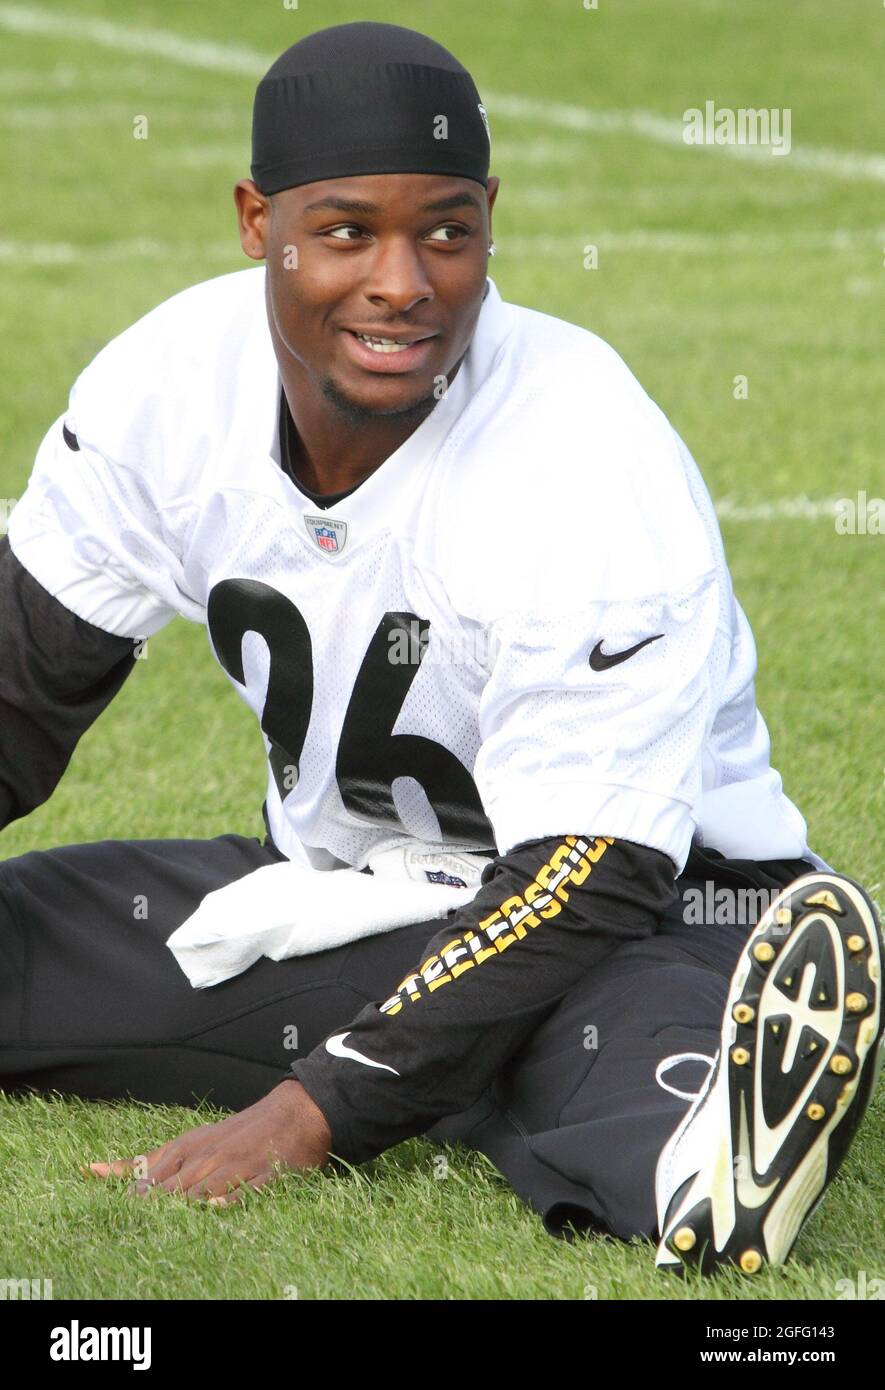 London. UK. LeVeon Bell of the  Pittsburgh Steelers in the UK for Sunday's NFL International Series Game 7 vs Minnesota Vikings at Wembley Stadium. Seen here training at the  London Wasps Rugby Football Ground . 27th  September 2013. Ref: LMK73-45408-280913.  Keith Mayhew/Landmark Media WWW.LMKMEDIA.COM. Stock Photo